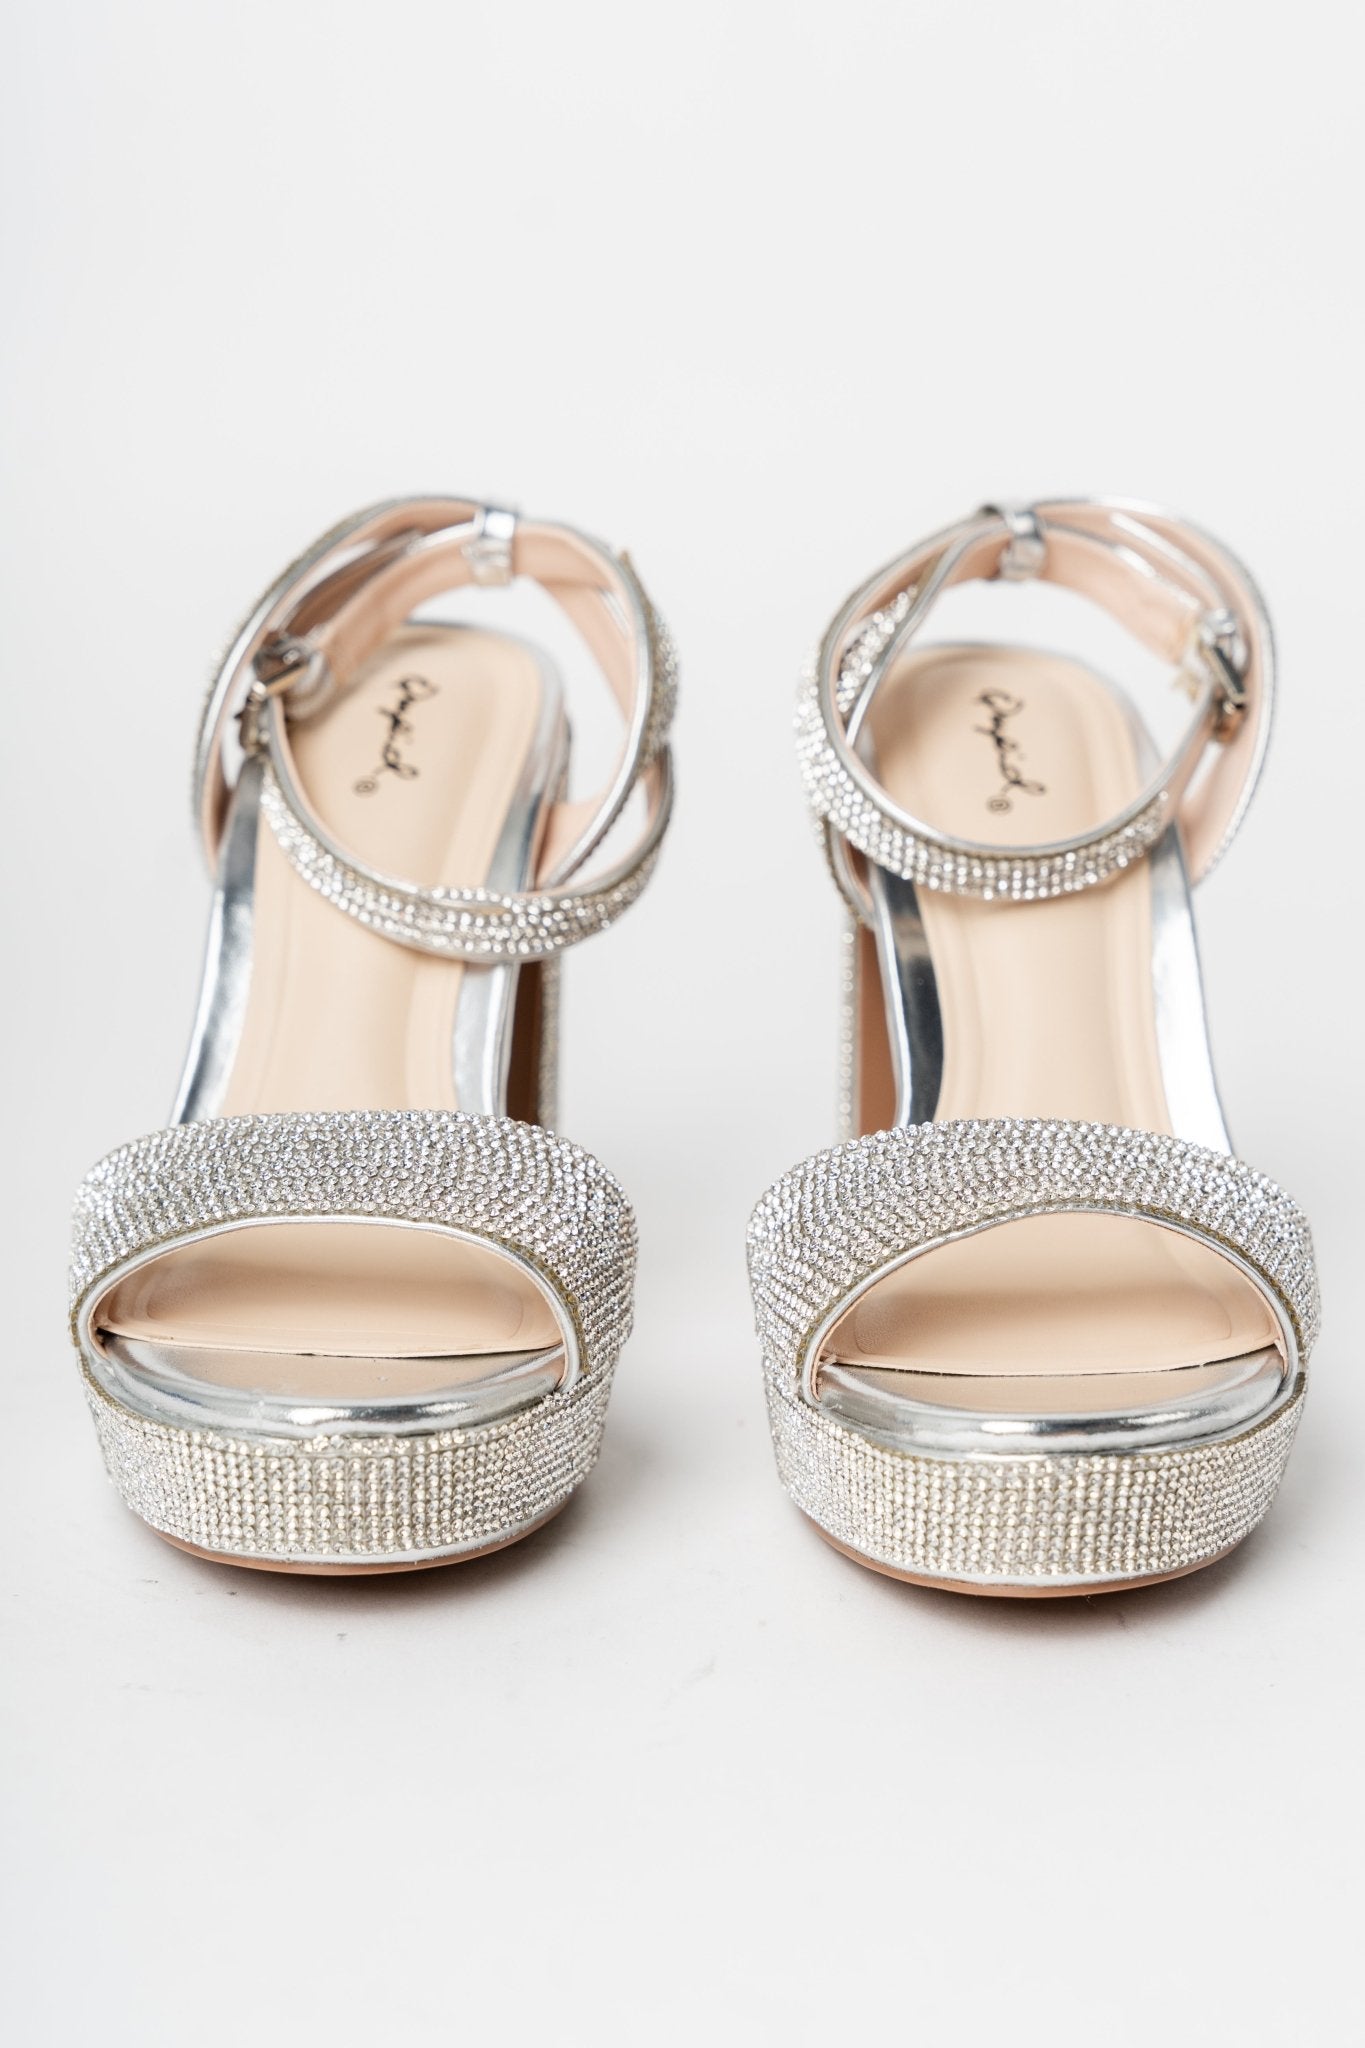 Lighting rhinestone chunky heel silver - Trendy shoes - Fashion Shoes at Lush Fashion Lounge Boutique in Oklahoma City